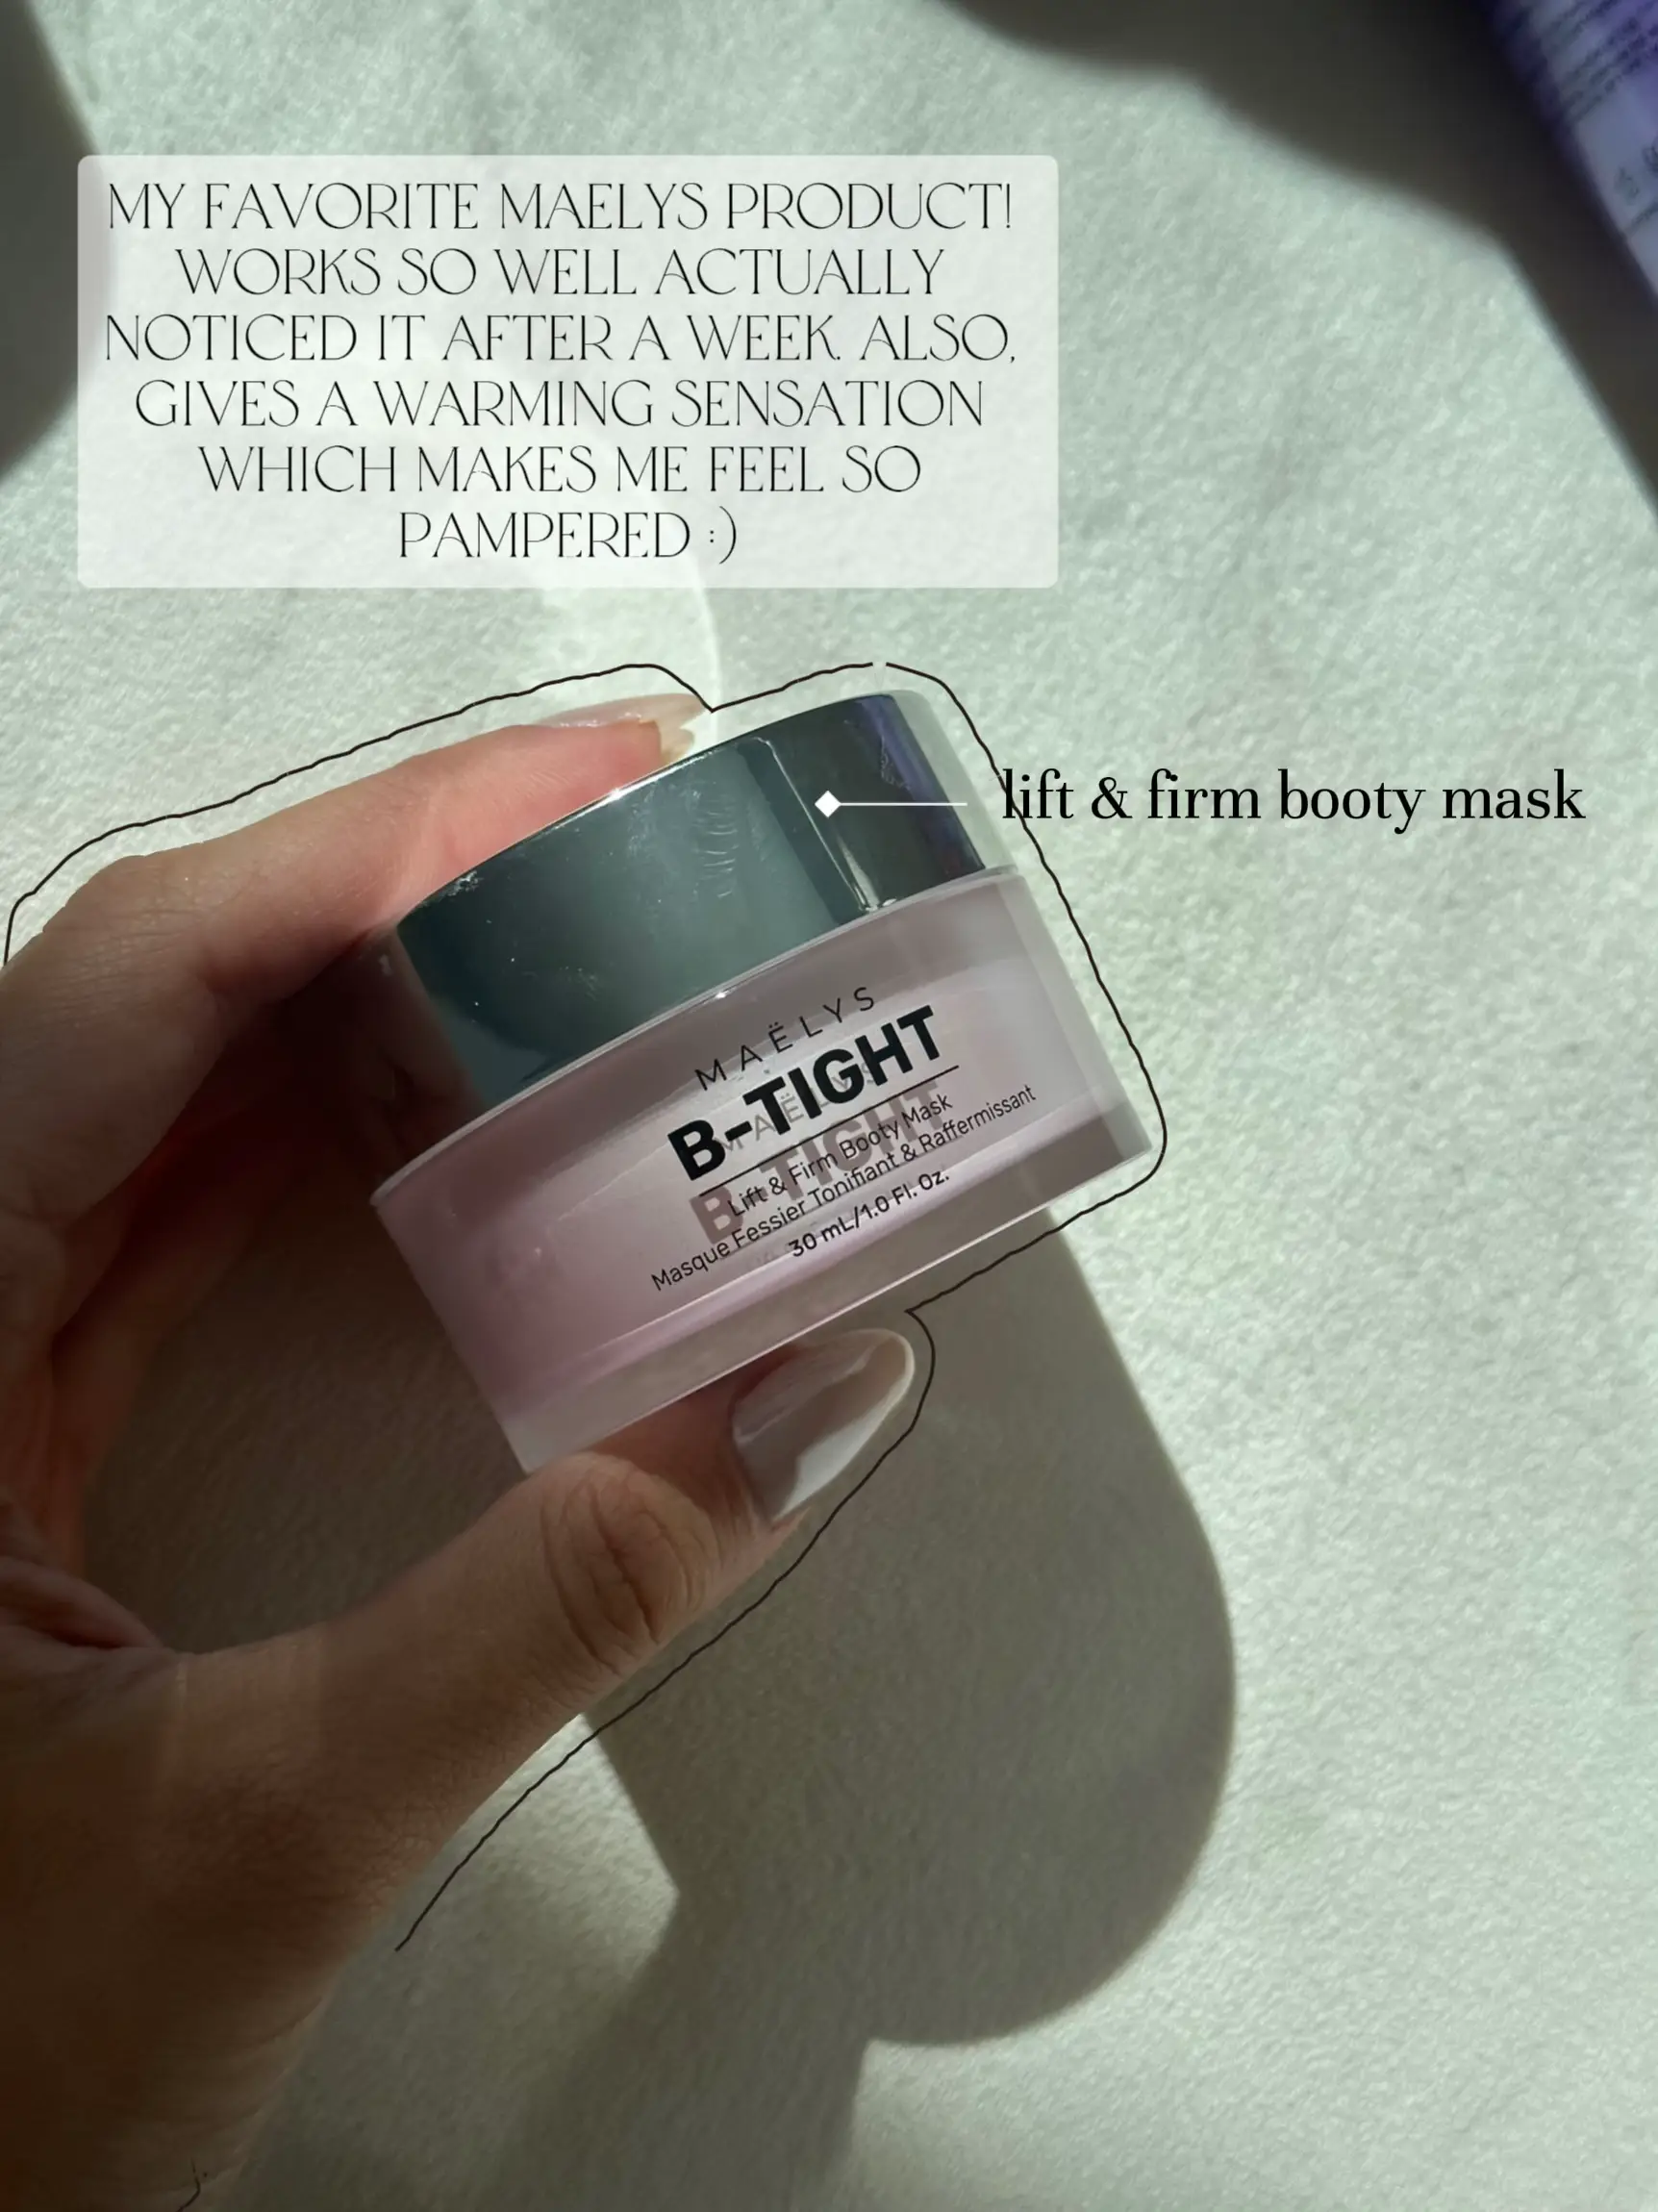 Maelys B-Tight Lift & Firm Booty Mask - 100 ml UNBOXED